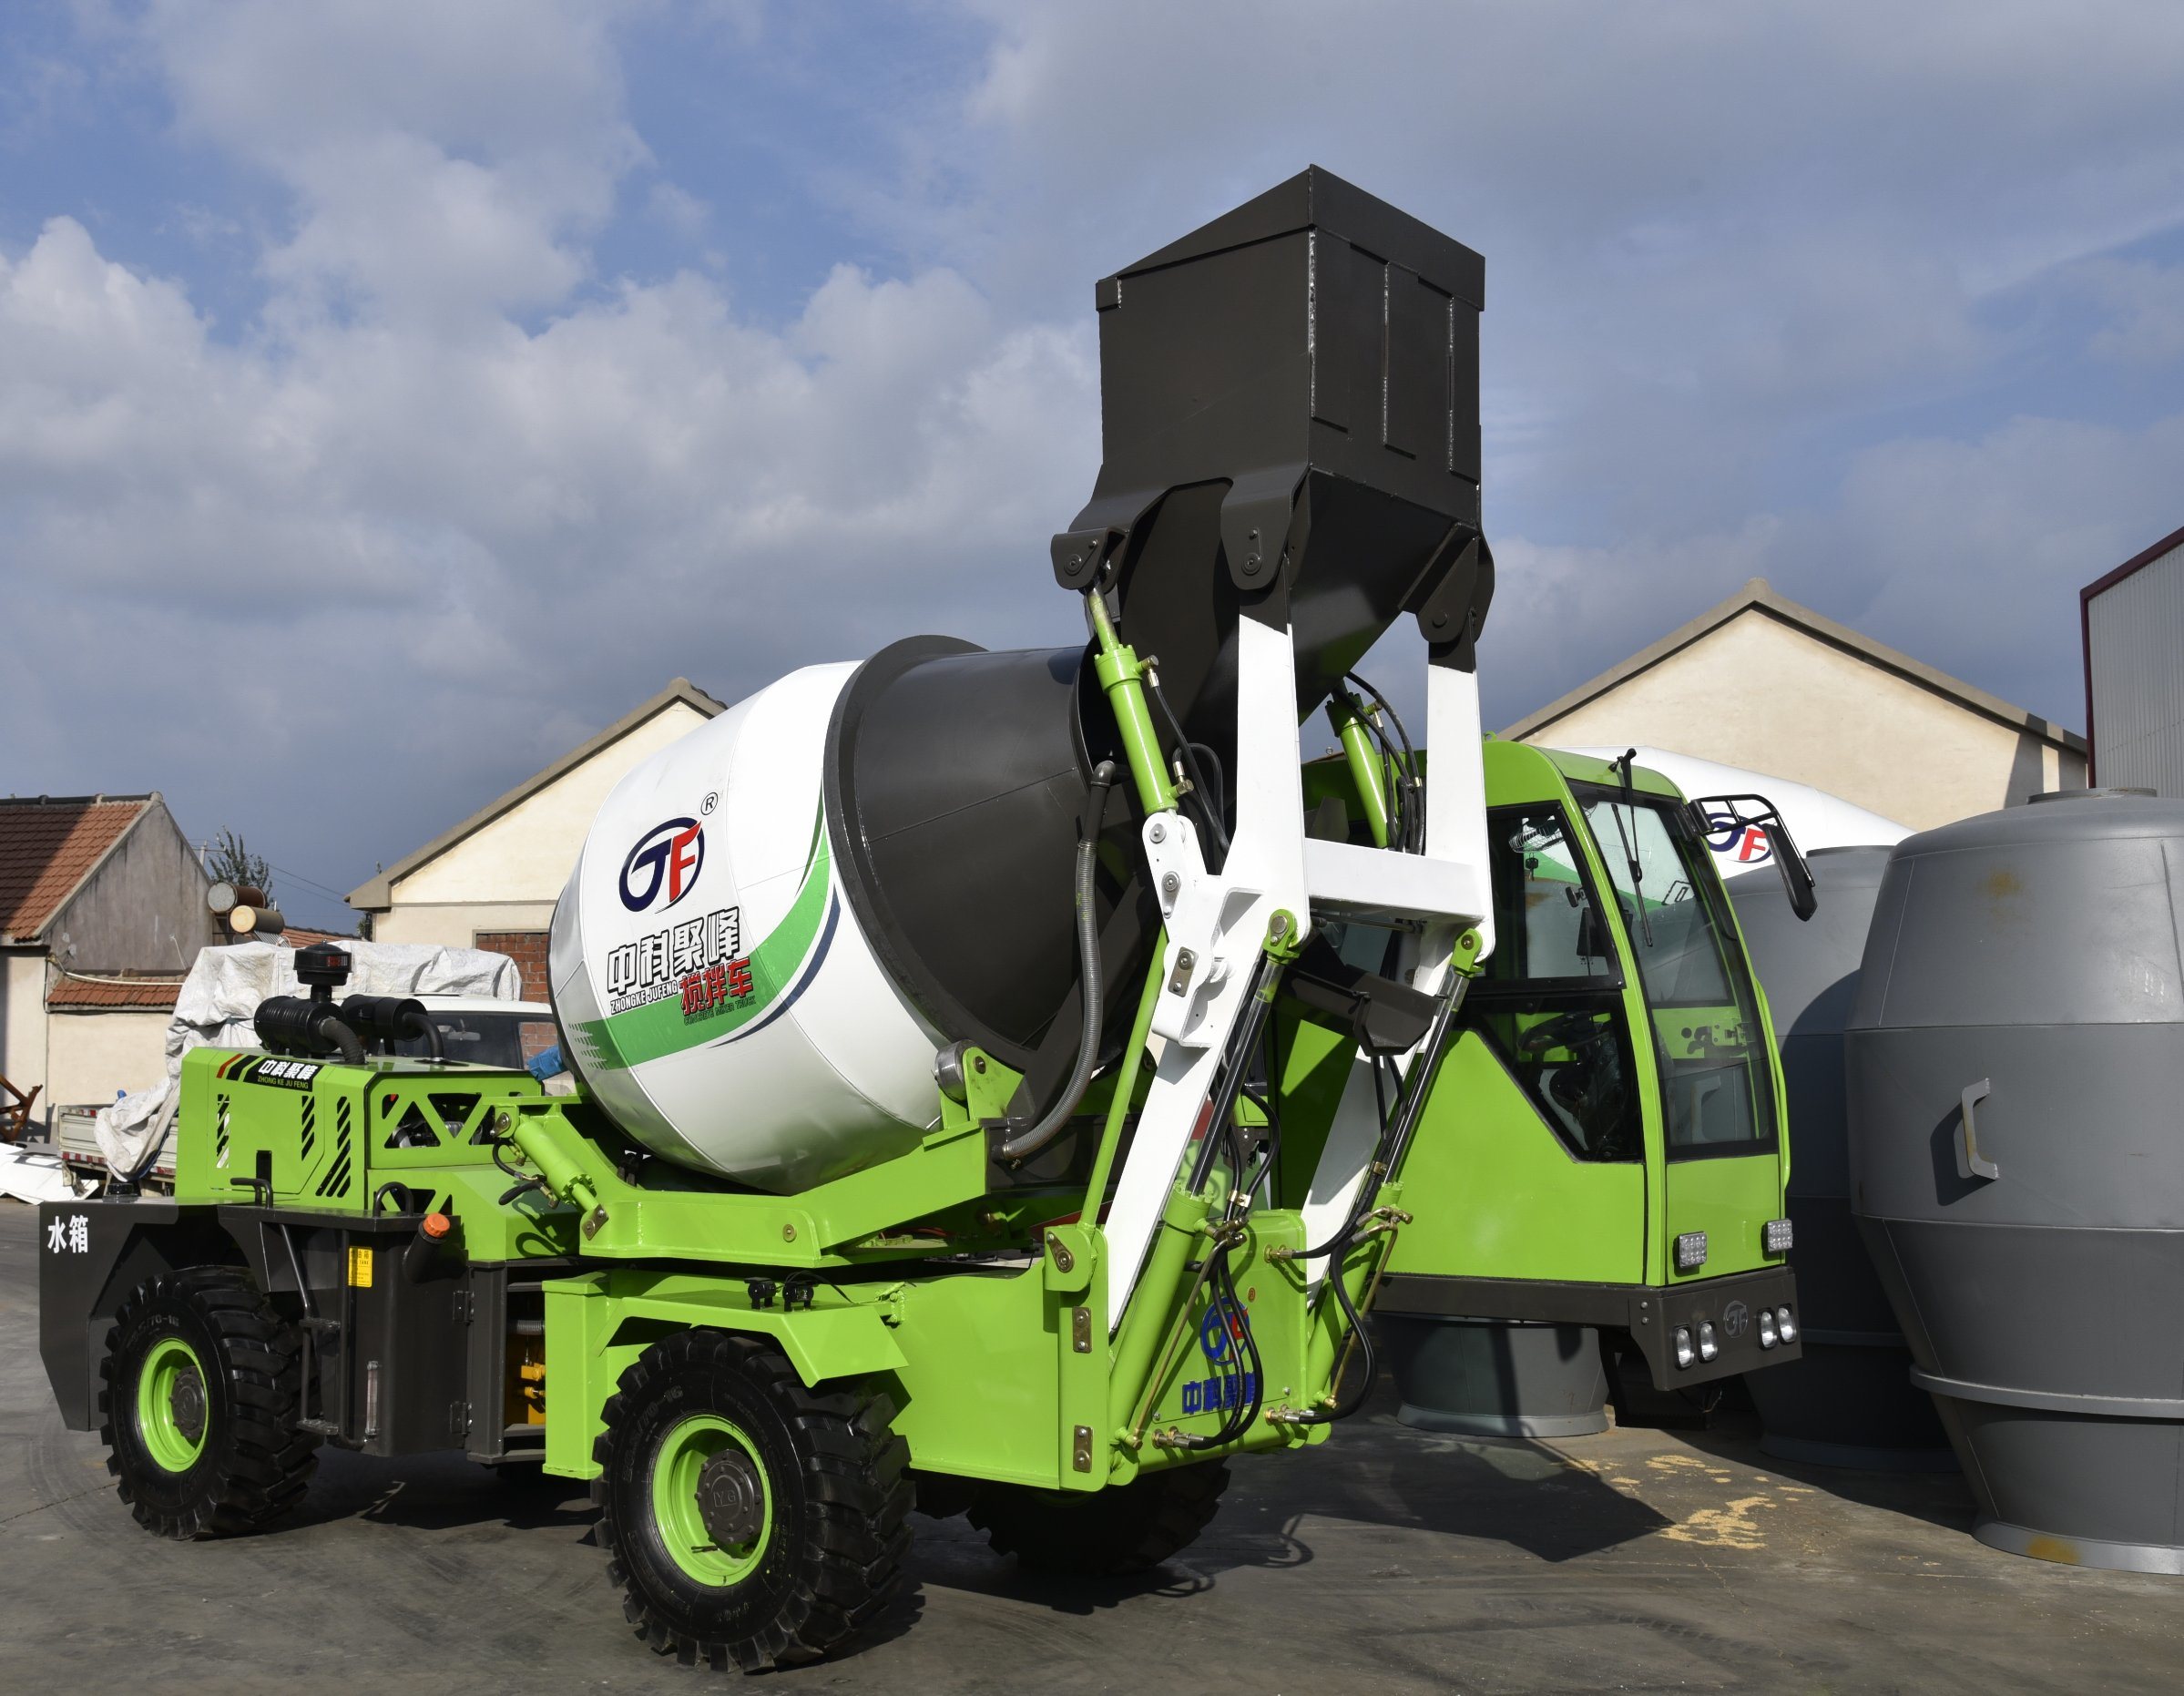 The main considerations when buying mobile concrete mixers in Israel